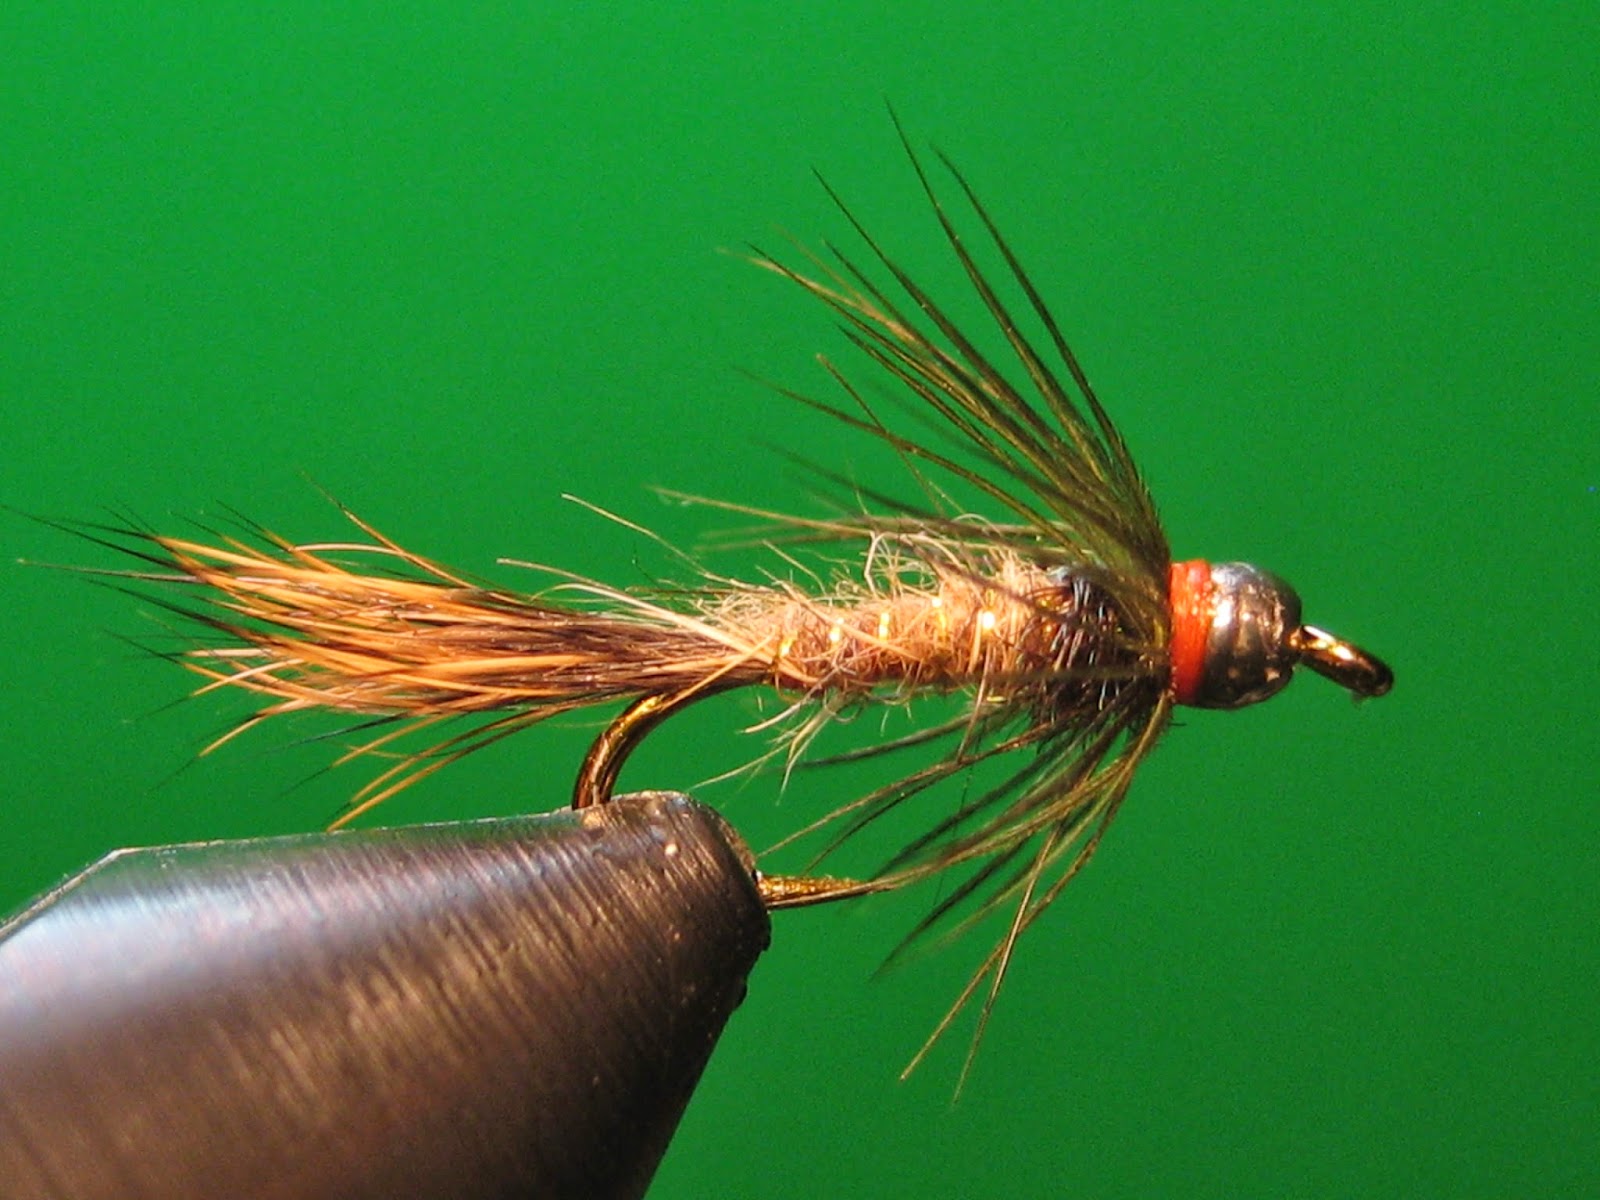 My Trout Fly: Guides choice hares ear